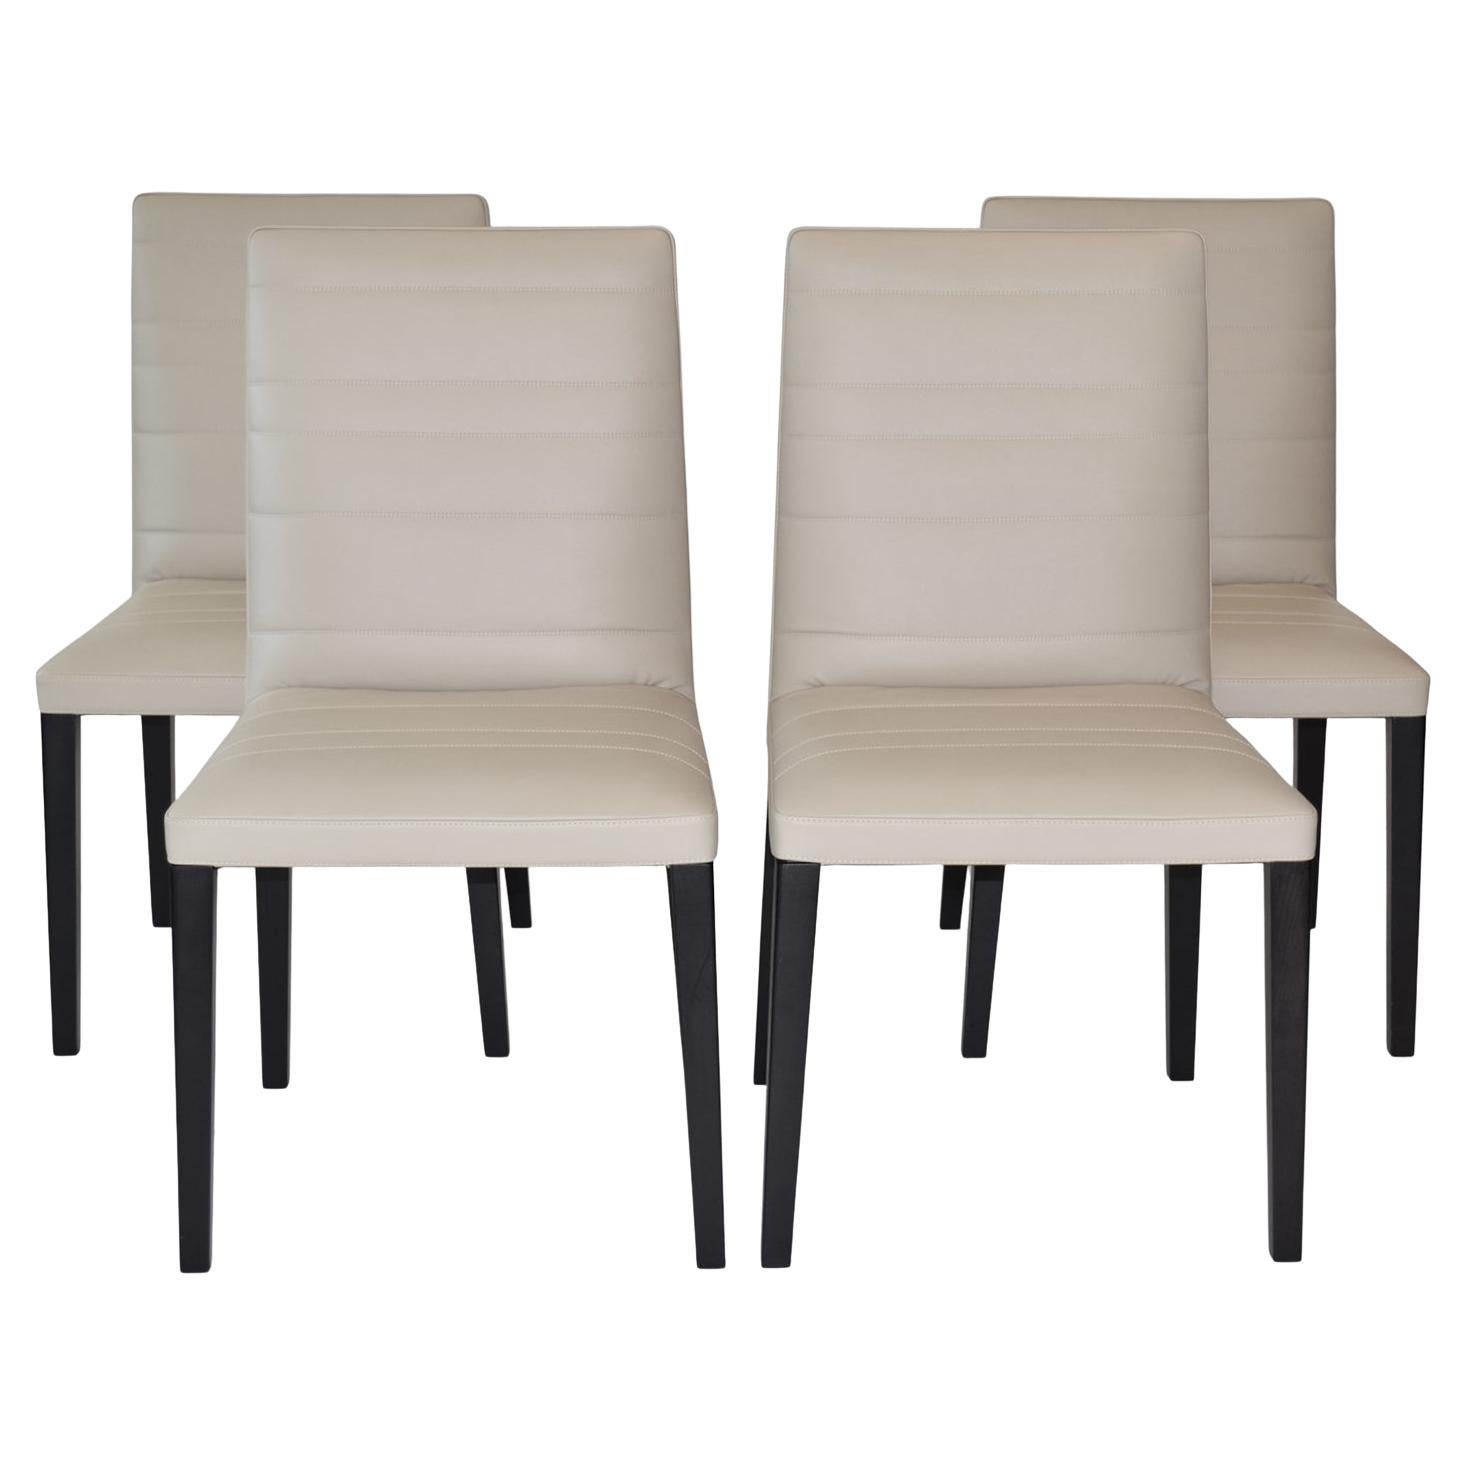 Set of Four Leather and Wood Louise Dining or Side Chairs by Poltrona Frau Italy